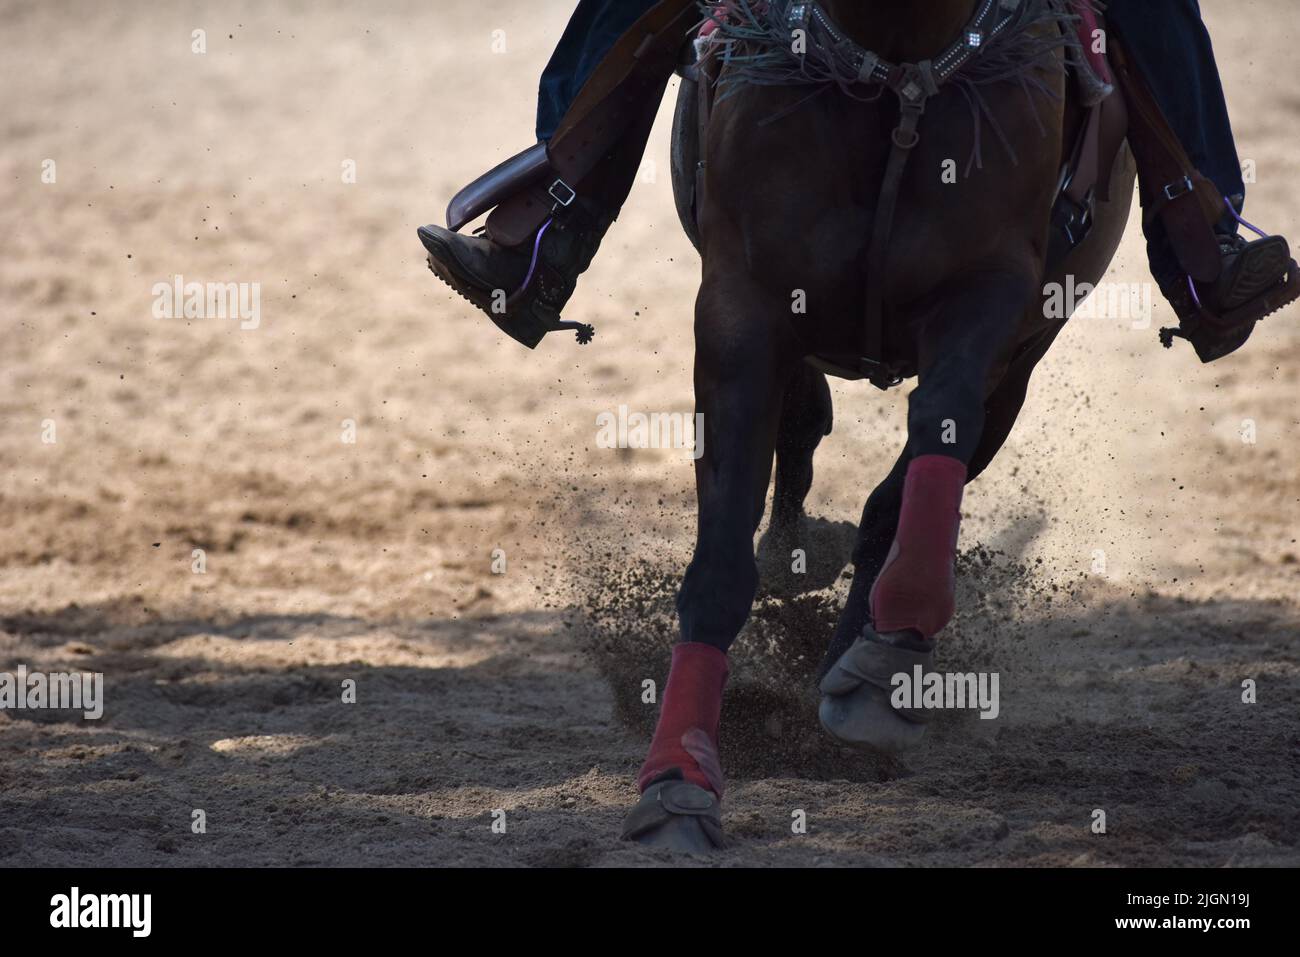 Closeup of the hooves of a horse at a gallop with the boots and spurs of the rider visible. Stock Photo